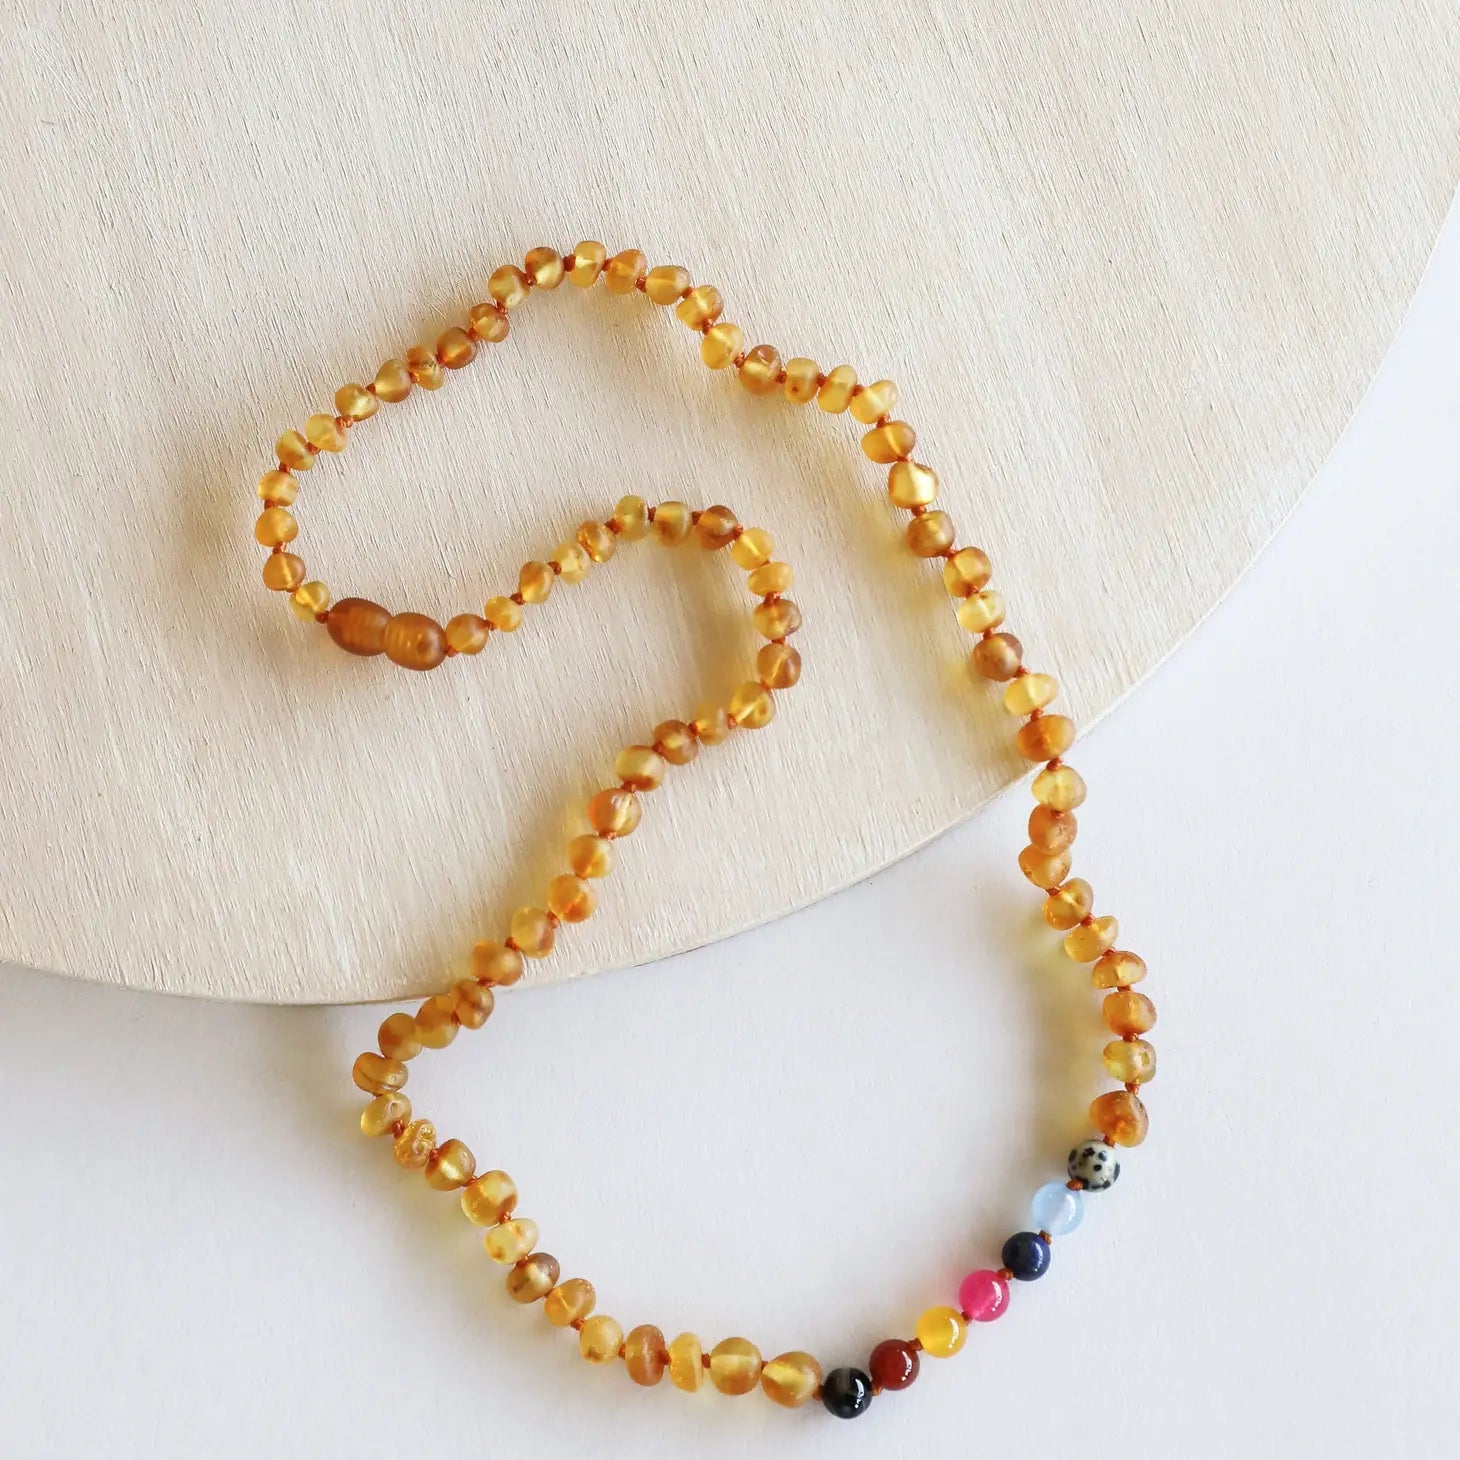 Adult Amber Necklace Multicolor Real Amber Healing Gem stone - Inspire  Uplift